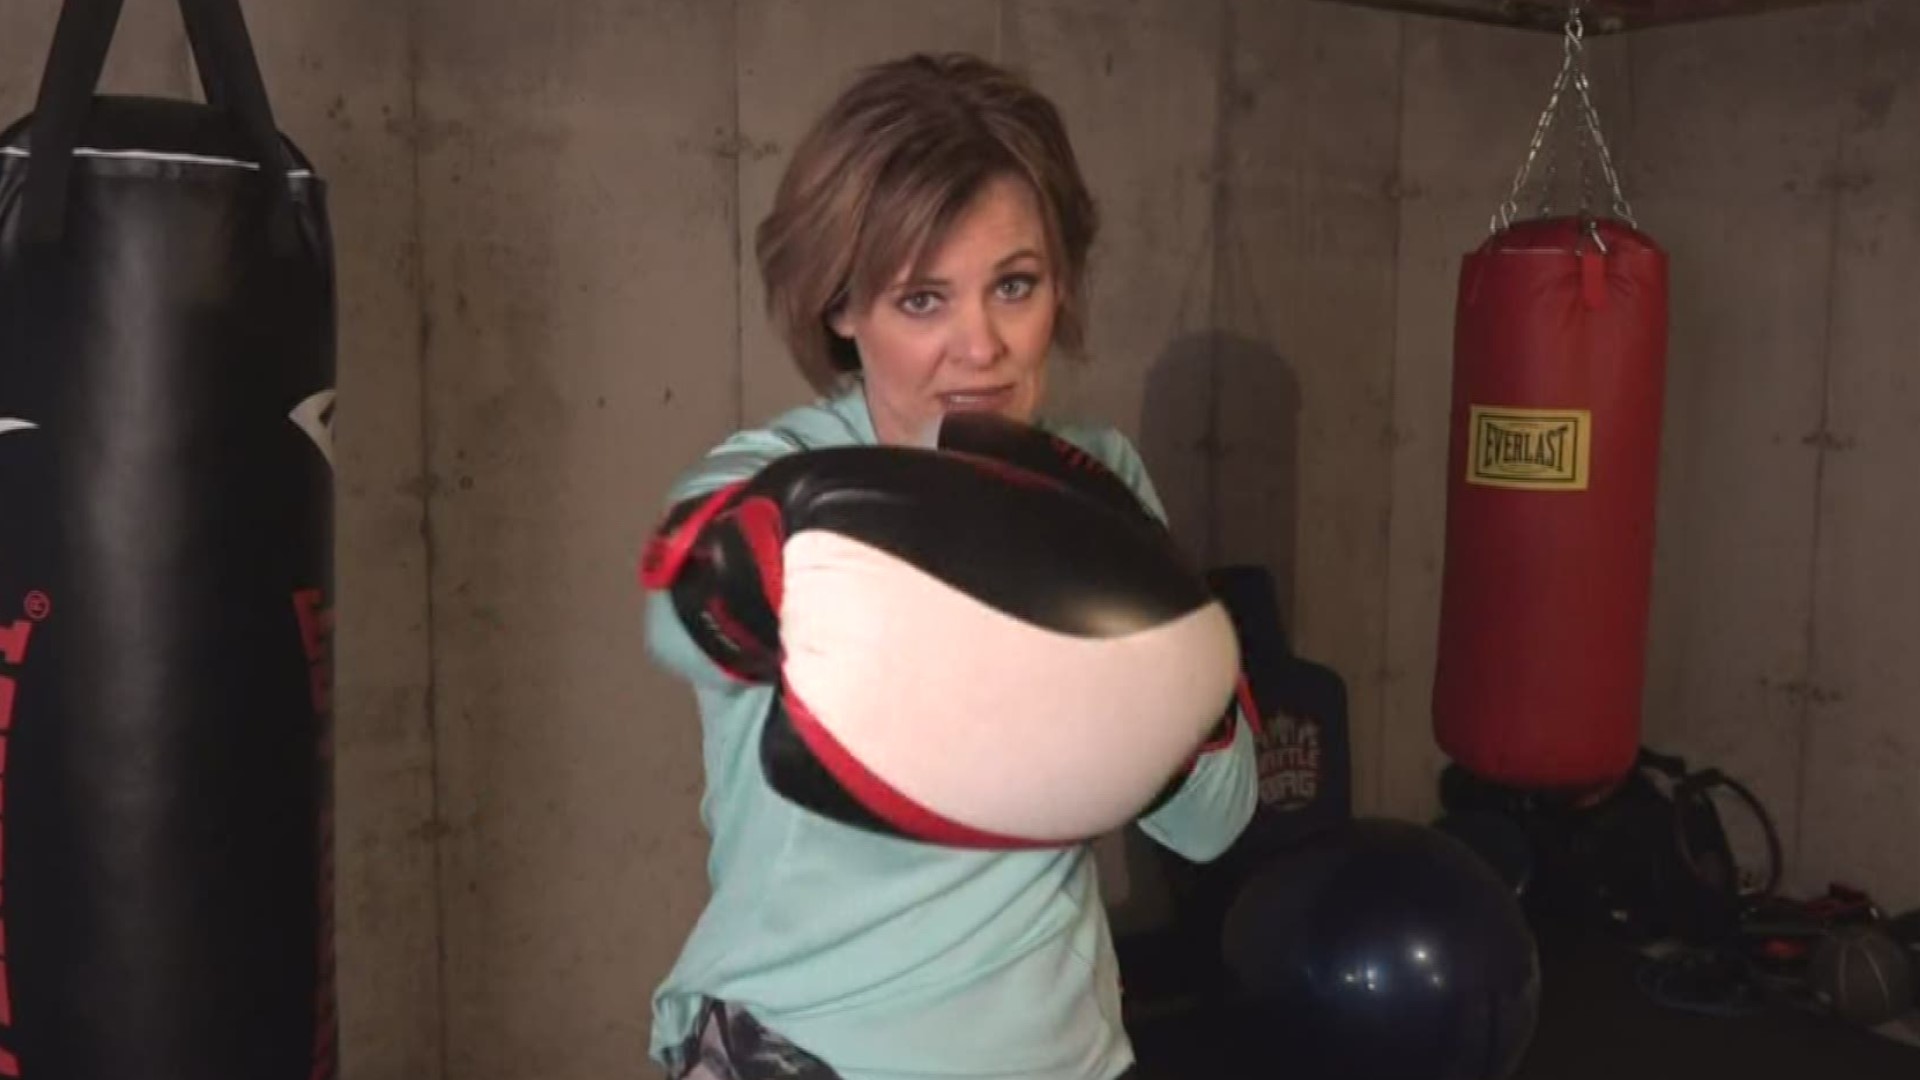 Today in St. Louis' Monica Adams shares tips for boxing from inside your home